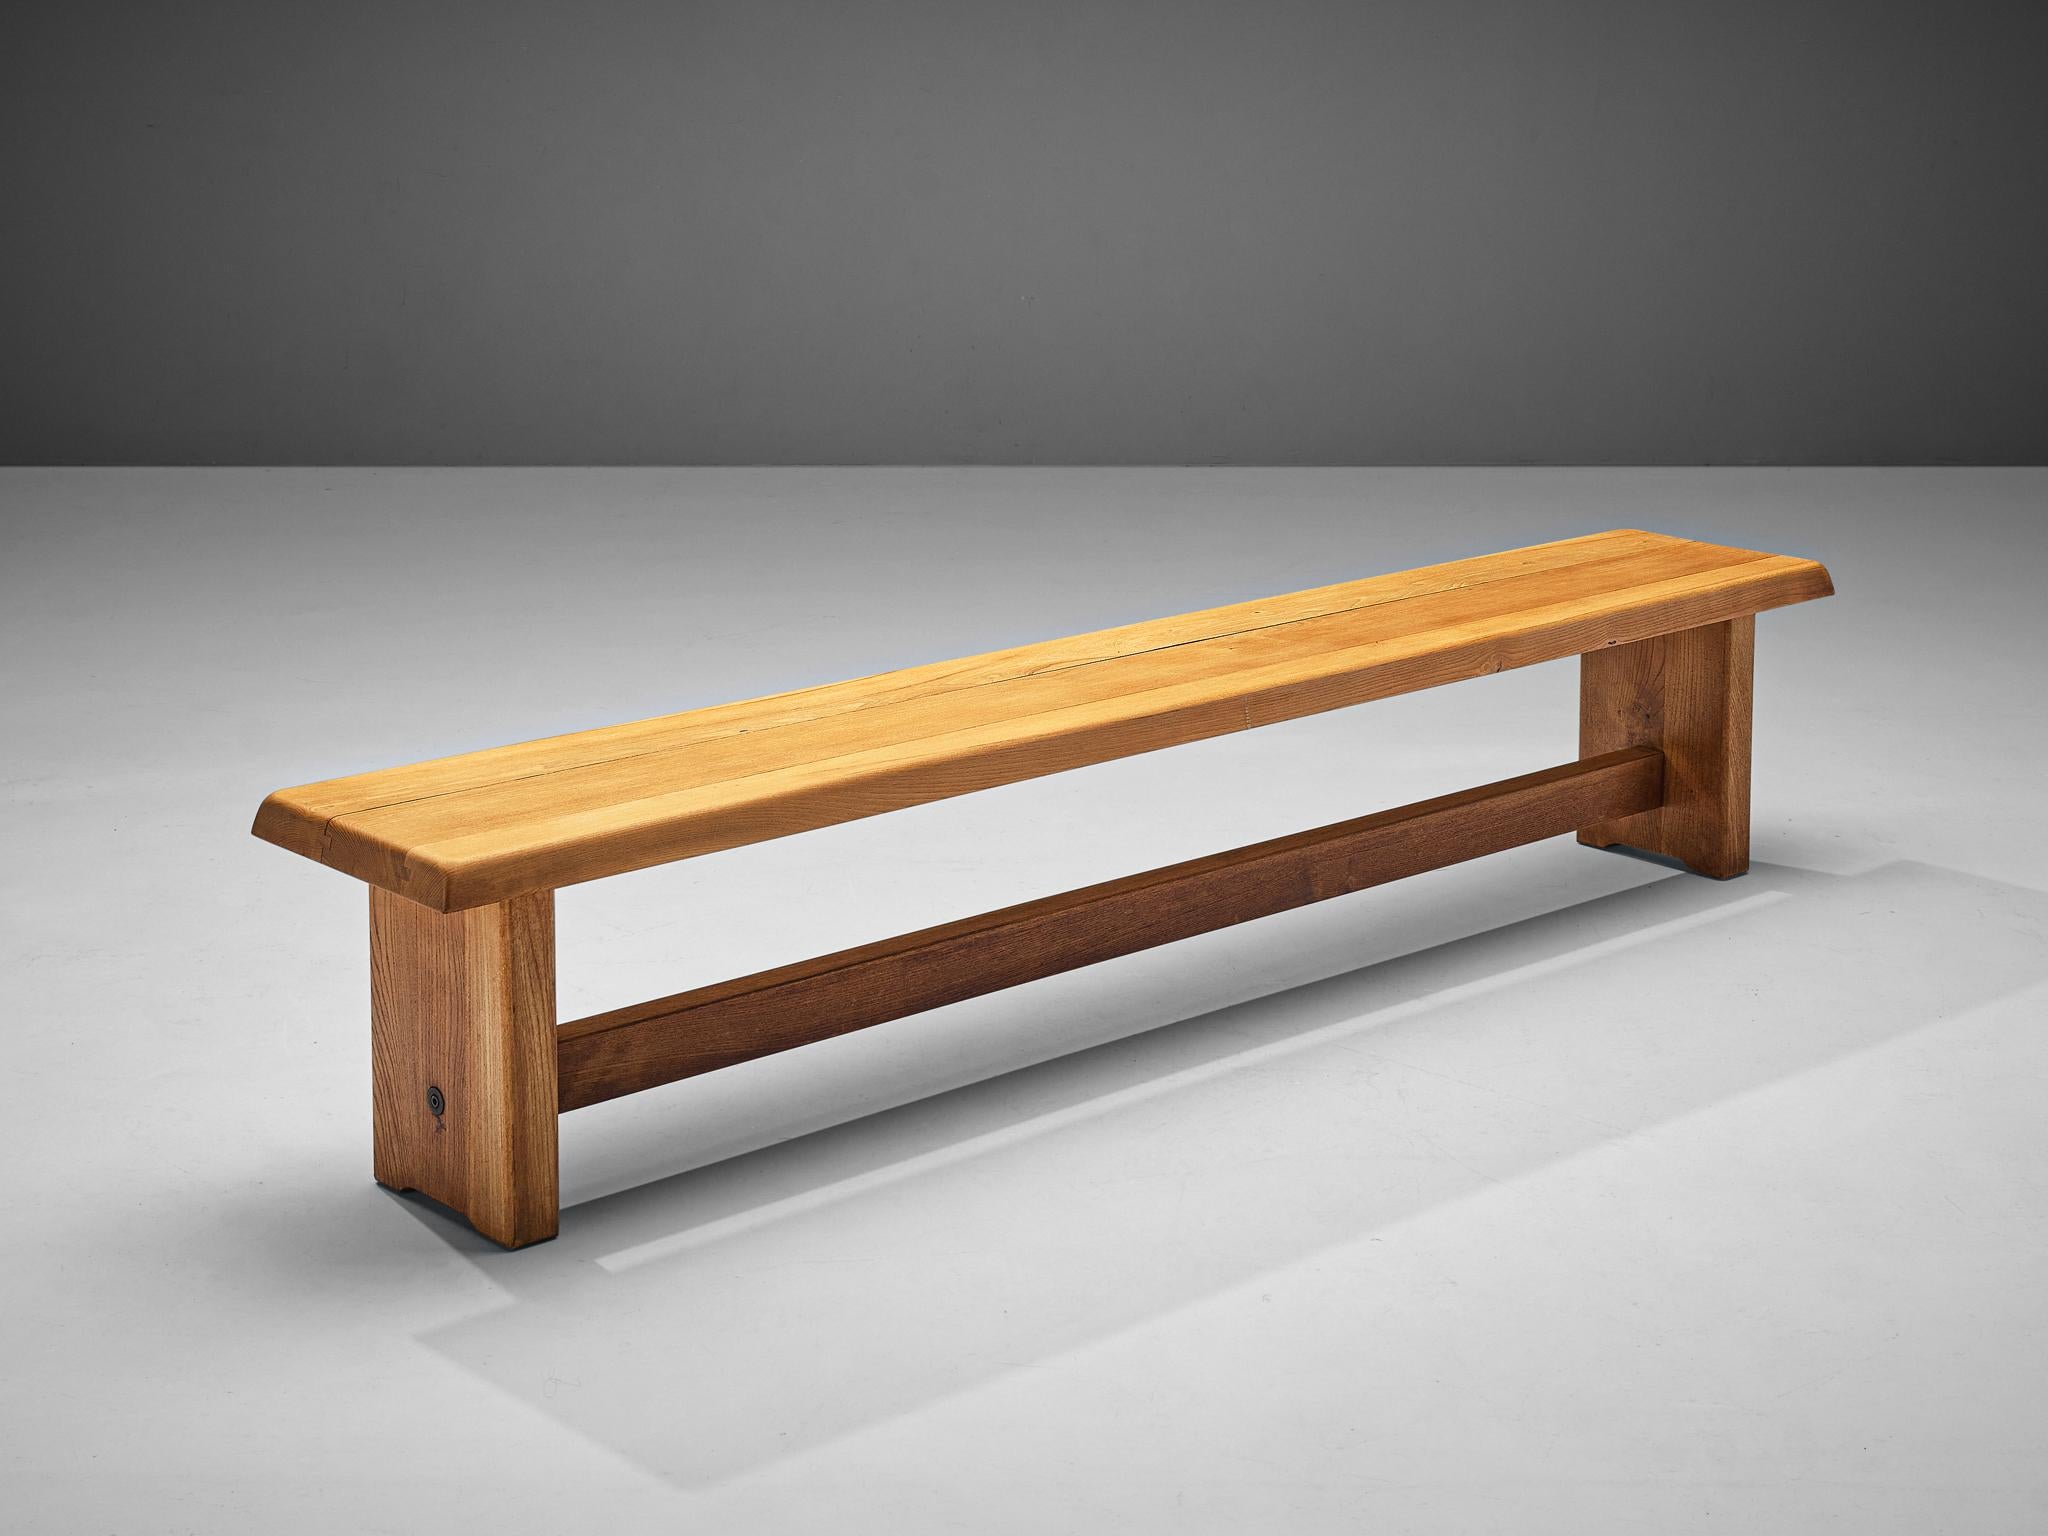 Pierre Chapo, bench model 'S14D', solid elm, France, 1950s. 

This elm bench is designed by the French designer Pierre Chapo. The rectangular top features sloping edges, rests on a two-legged base with a connecting horizontal beam. The strong and